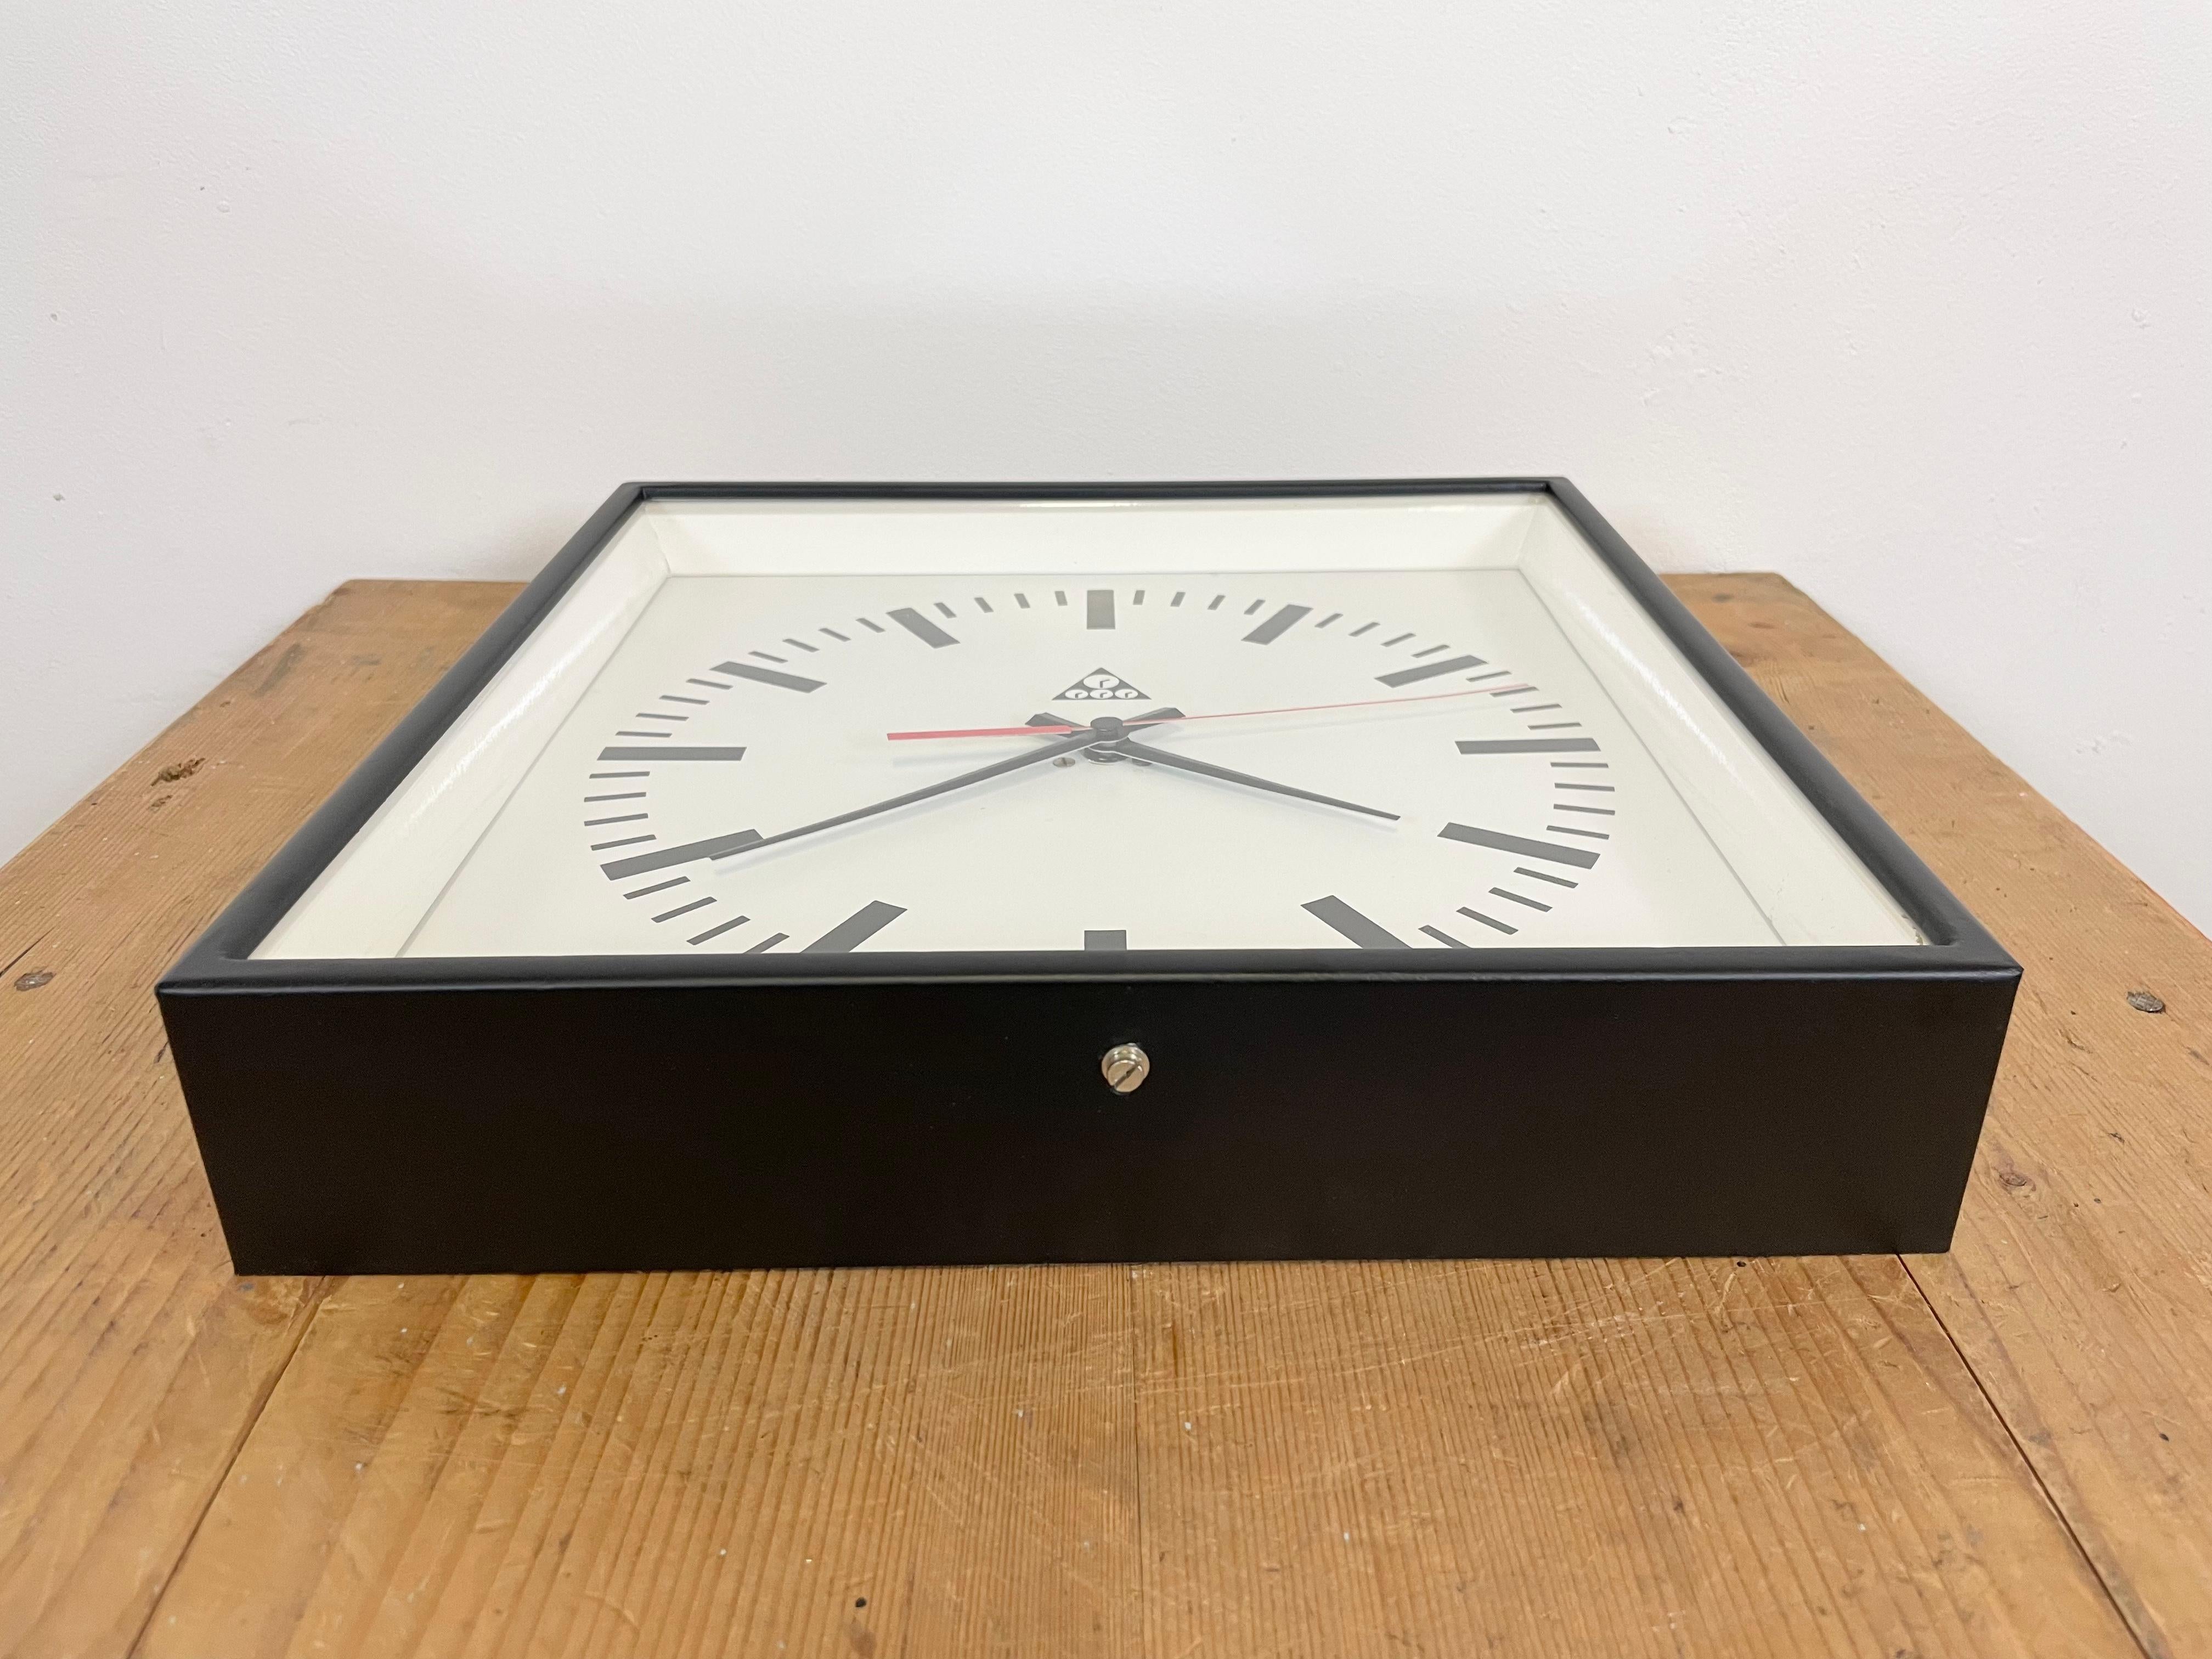 Black Industrial Square Wall Clock from Pragotron, 1970s 1